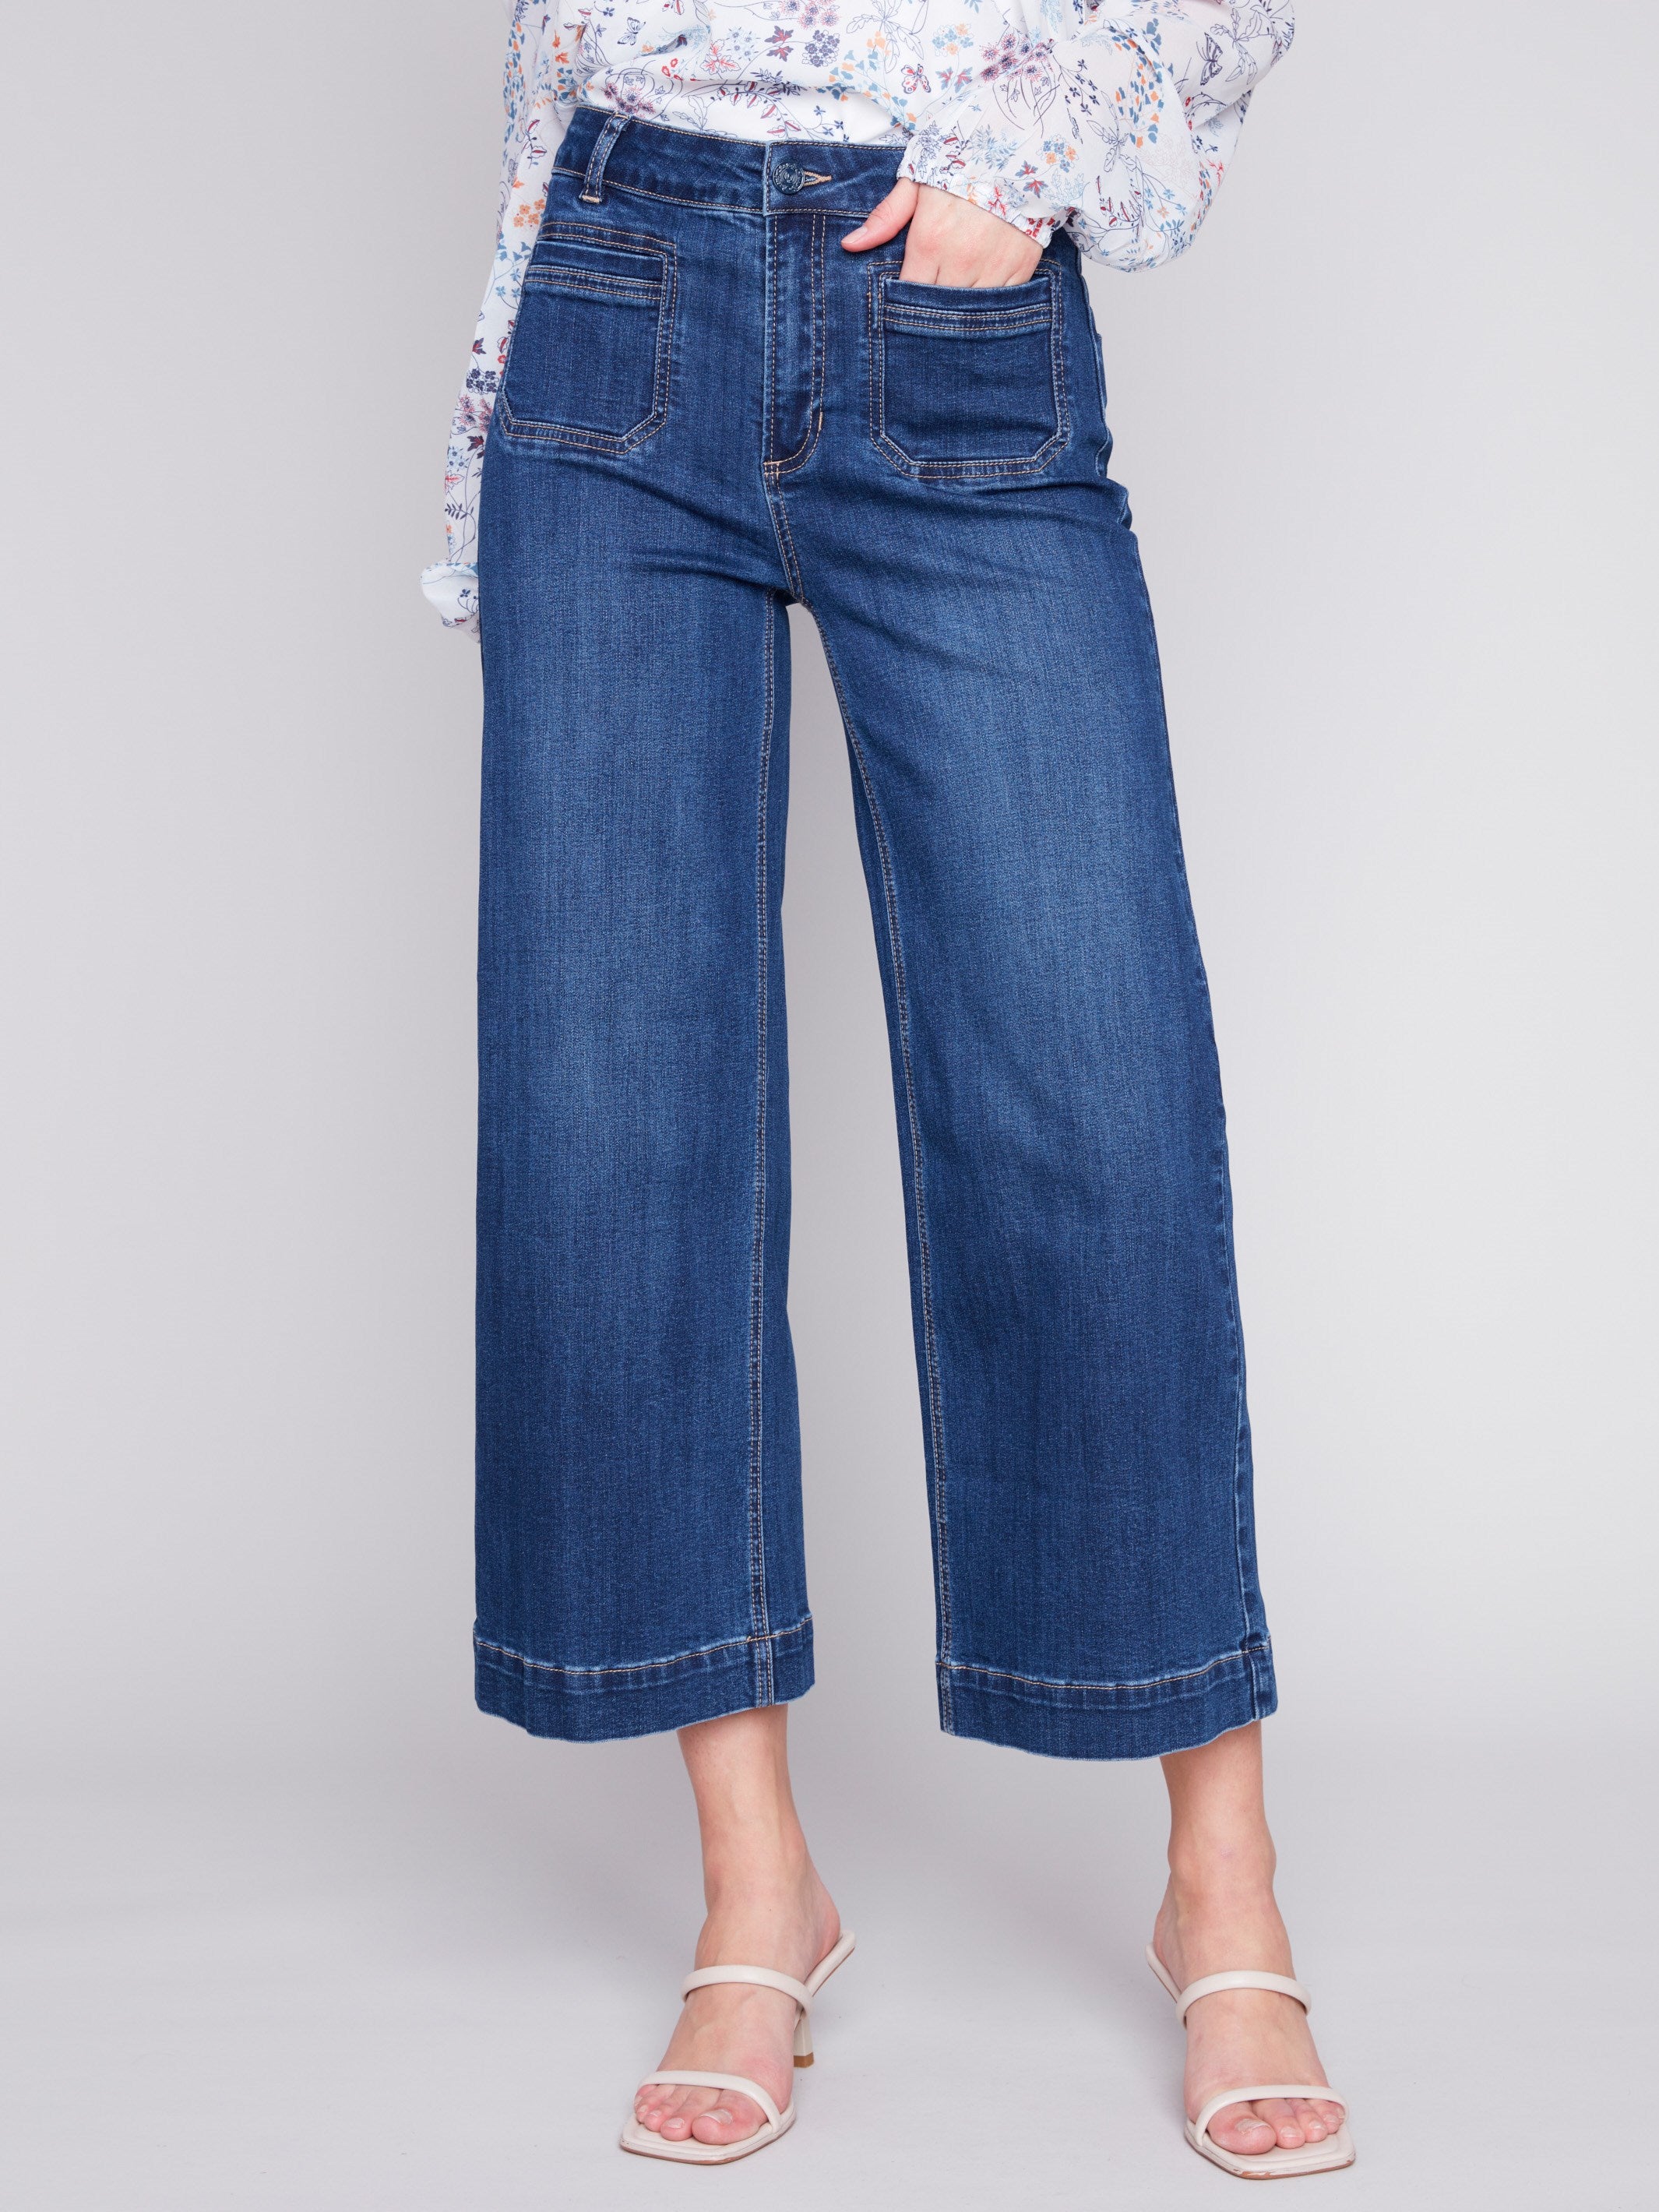 Cropped Wide Leg Jeans - Indigo - Charlie B Collection Canada - Image 2